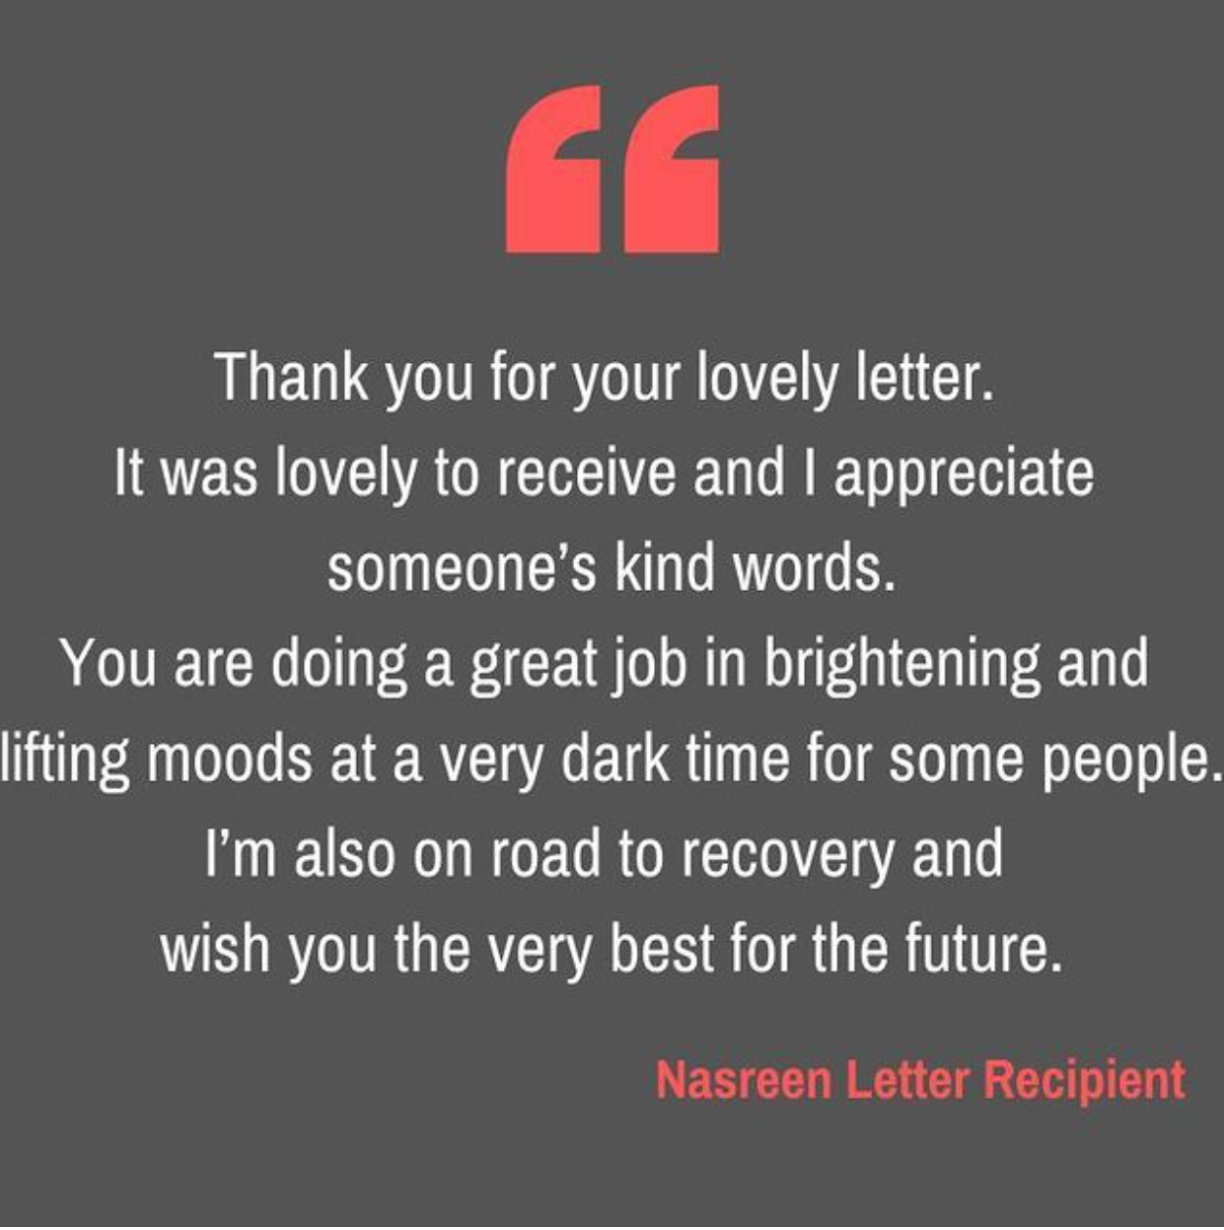 Nasreen - Letter Recipient - Quote Image.png